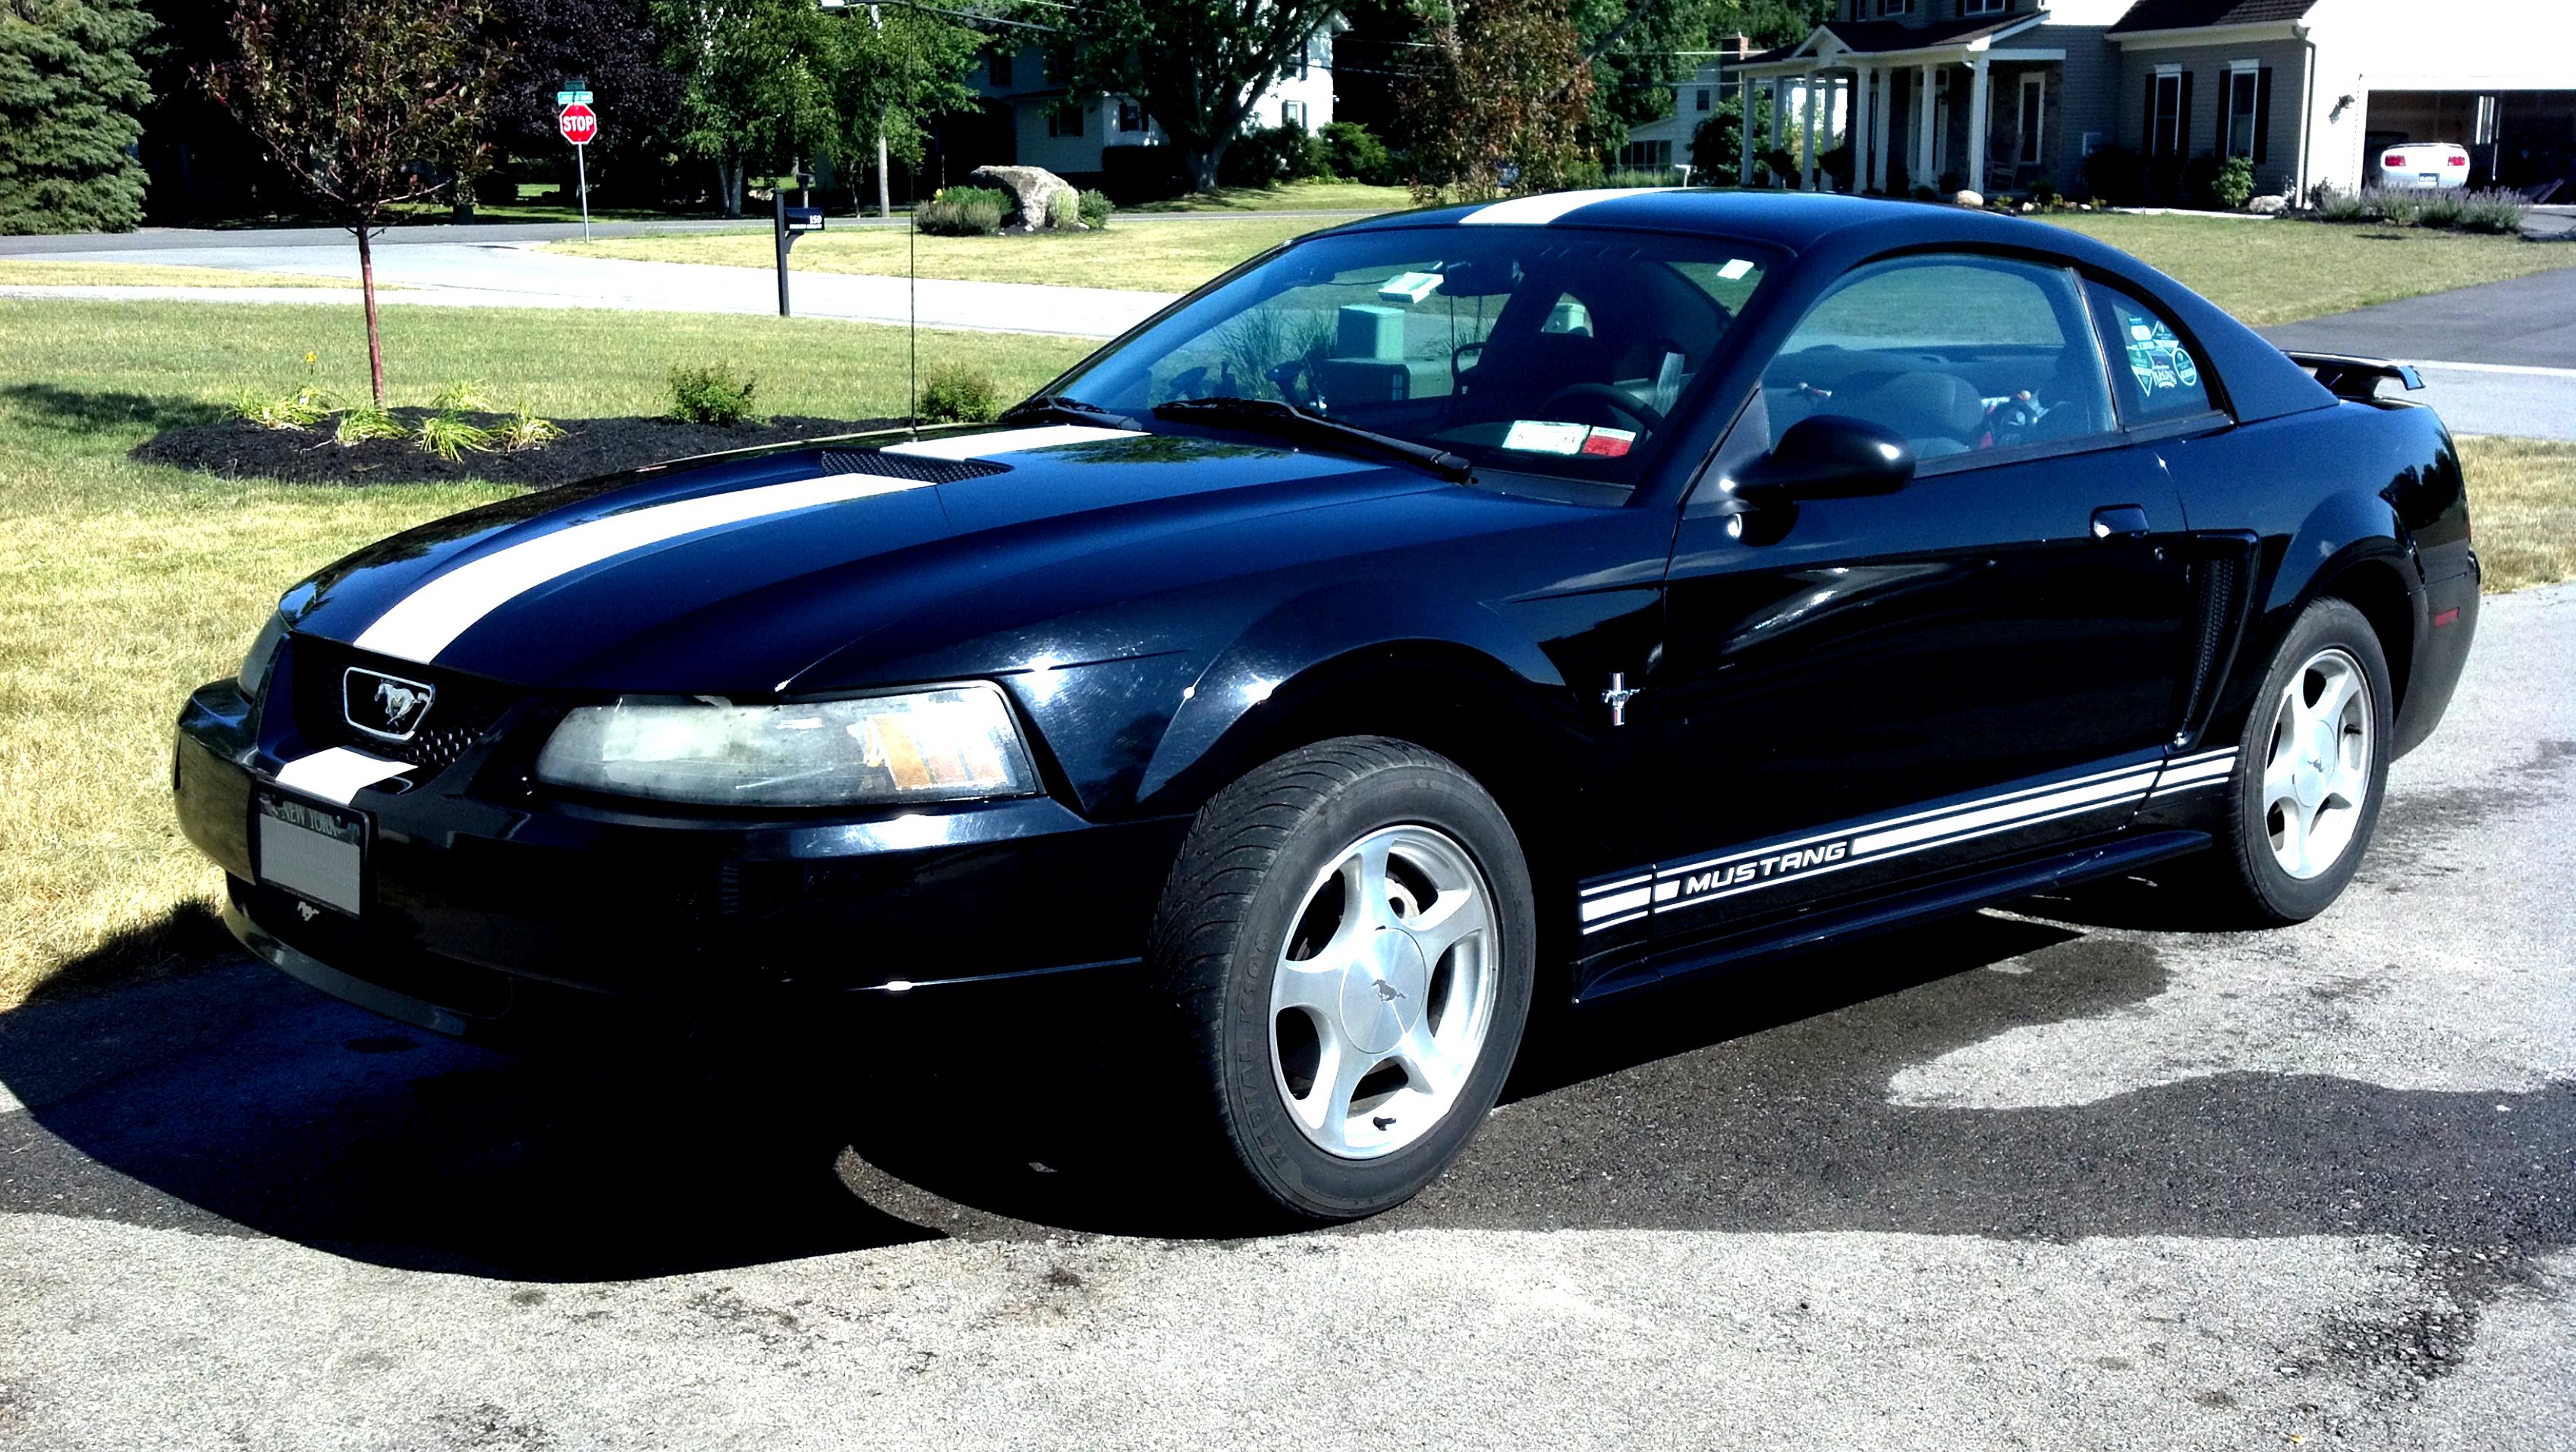 Ford Mustang Convertible 1998 on MotoImg.com 2000 Ford Mustang Tire Size P225 55r16 Gt